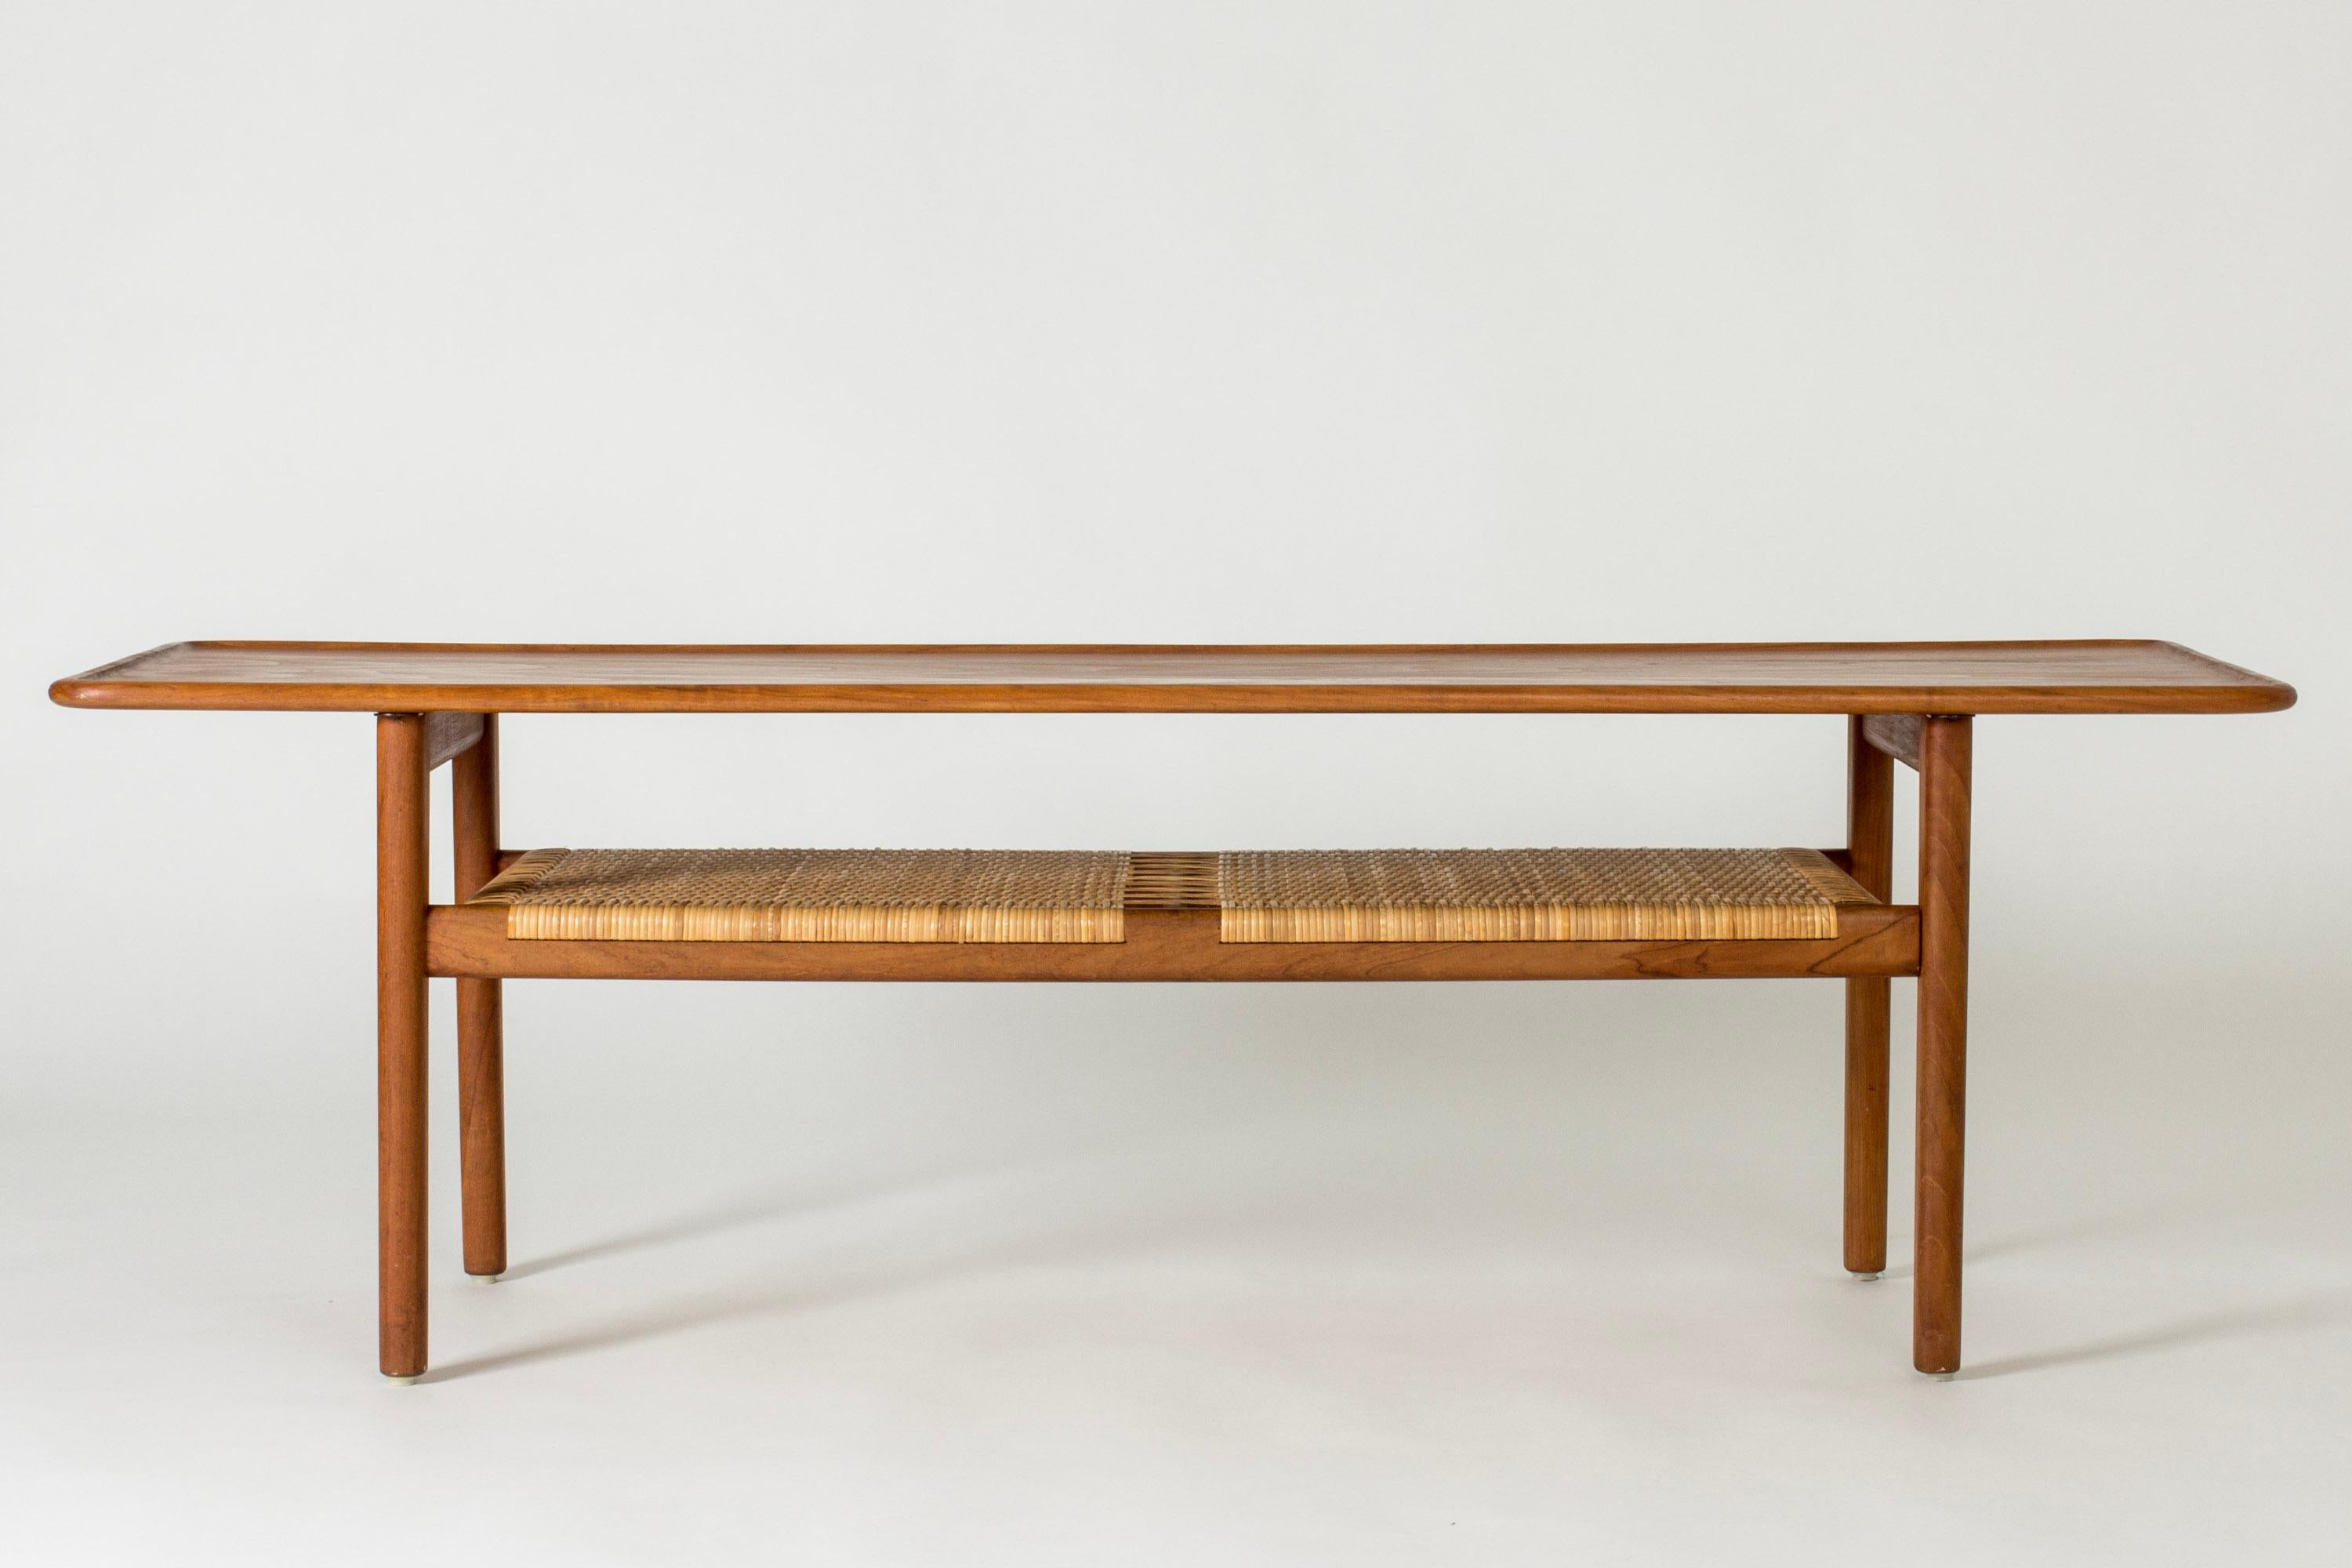 Beautiful teak coffee table with a rattan shelf by Hans J. Wegner, model “AT10”. The warm teak nuance contrasts nicely with the blonde rattan.